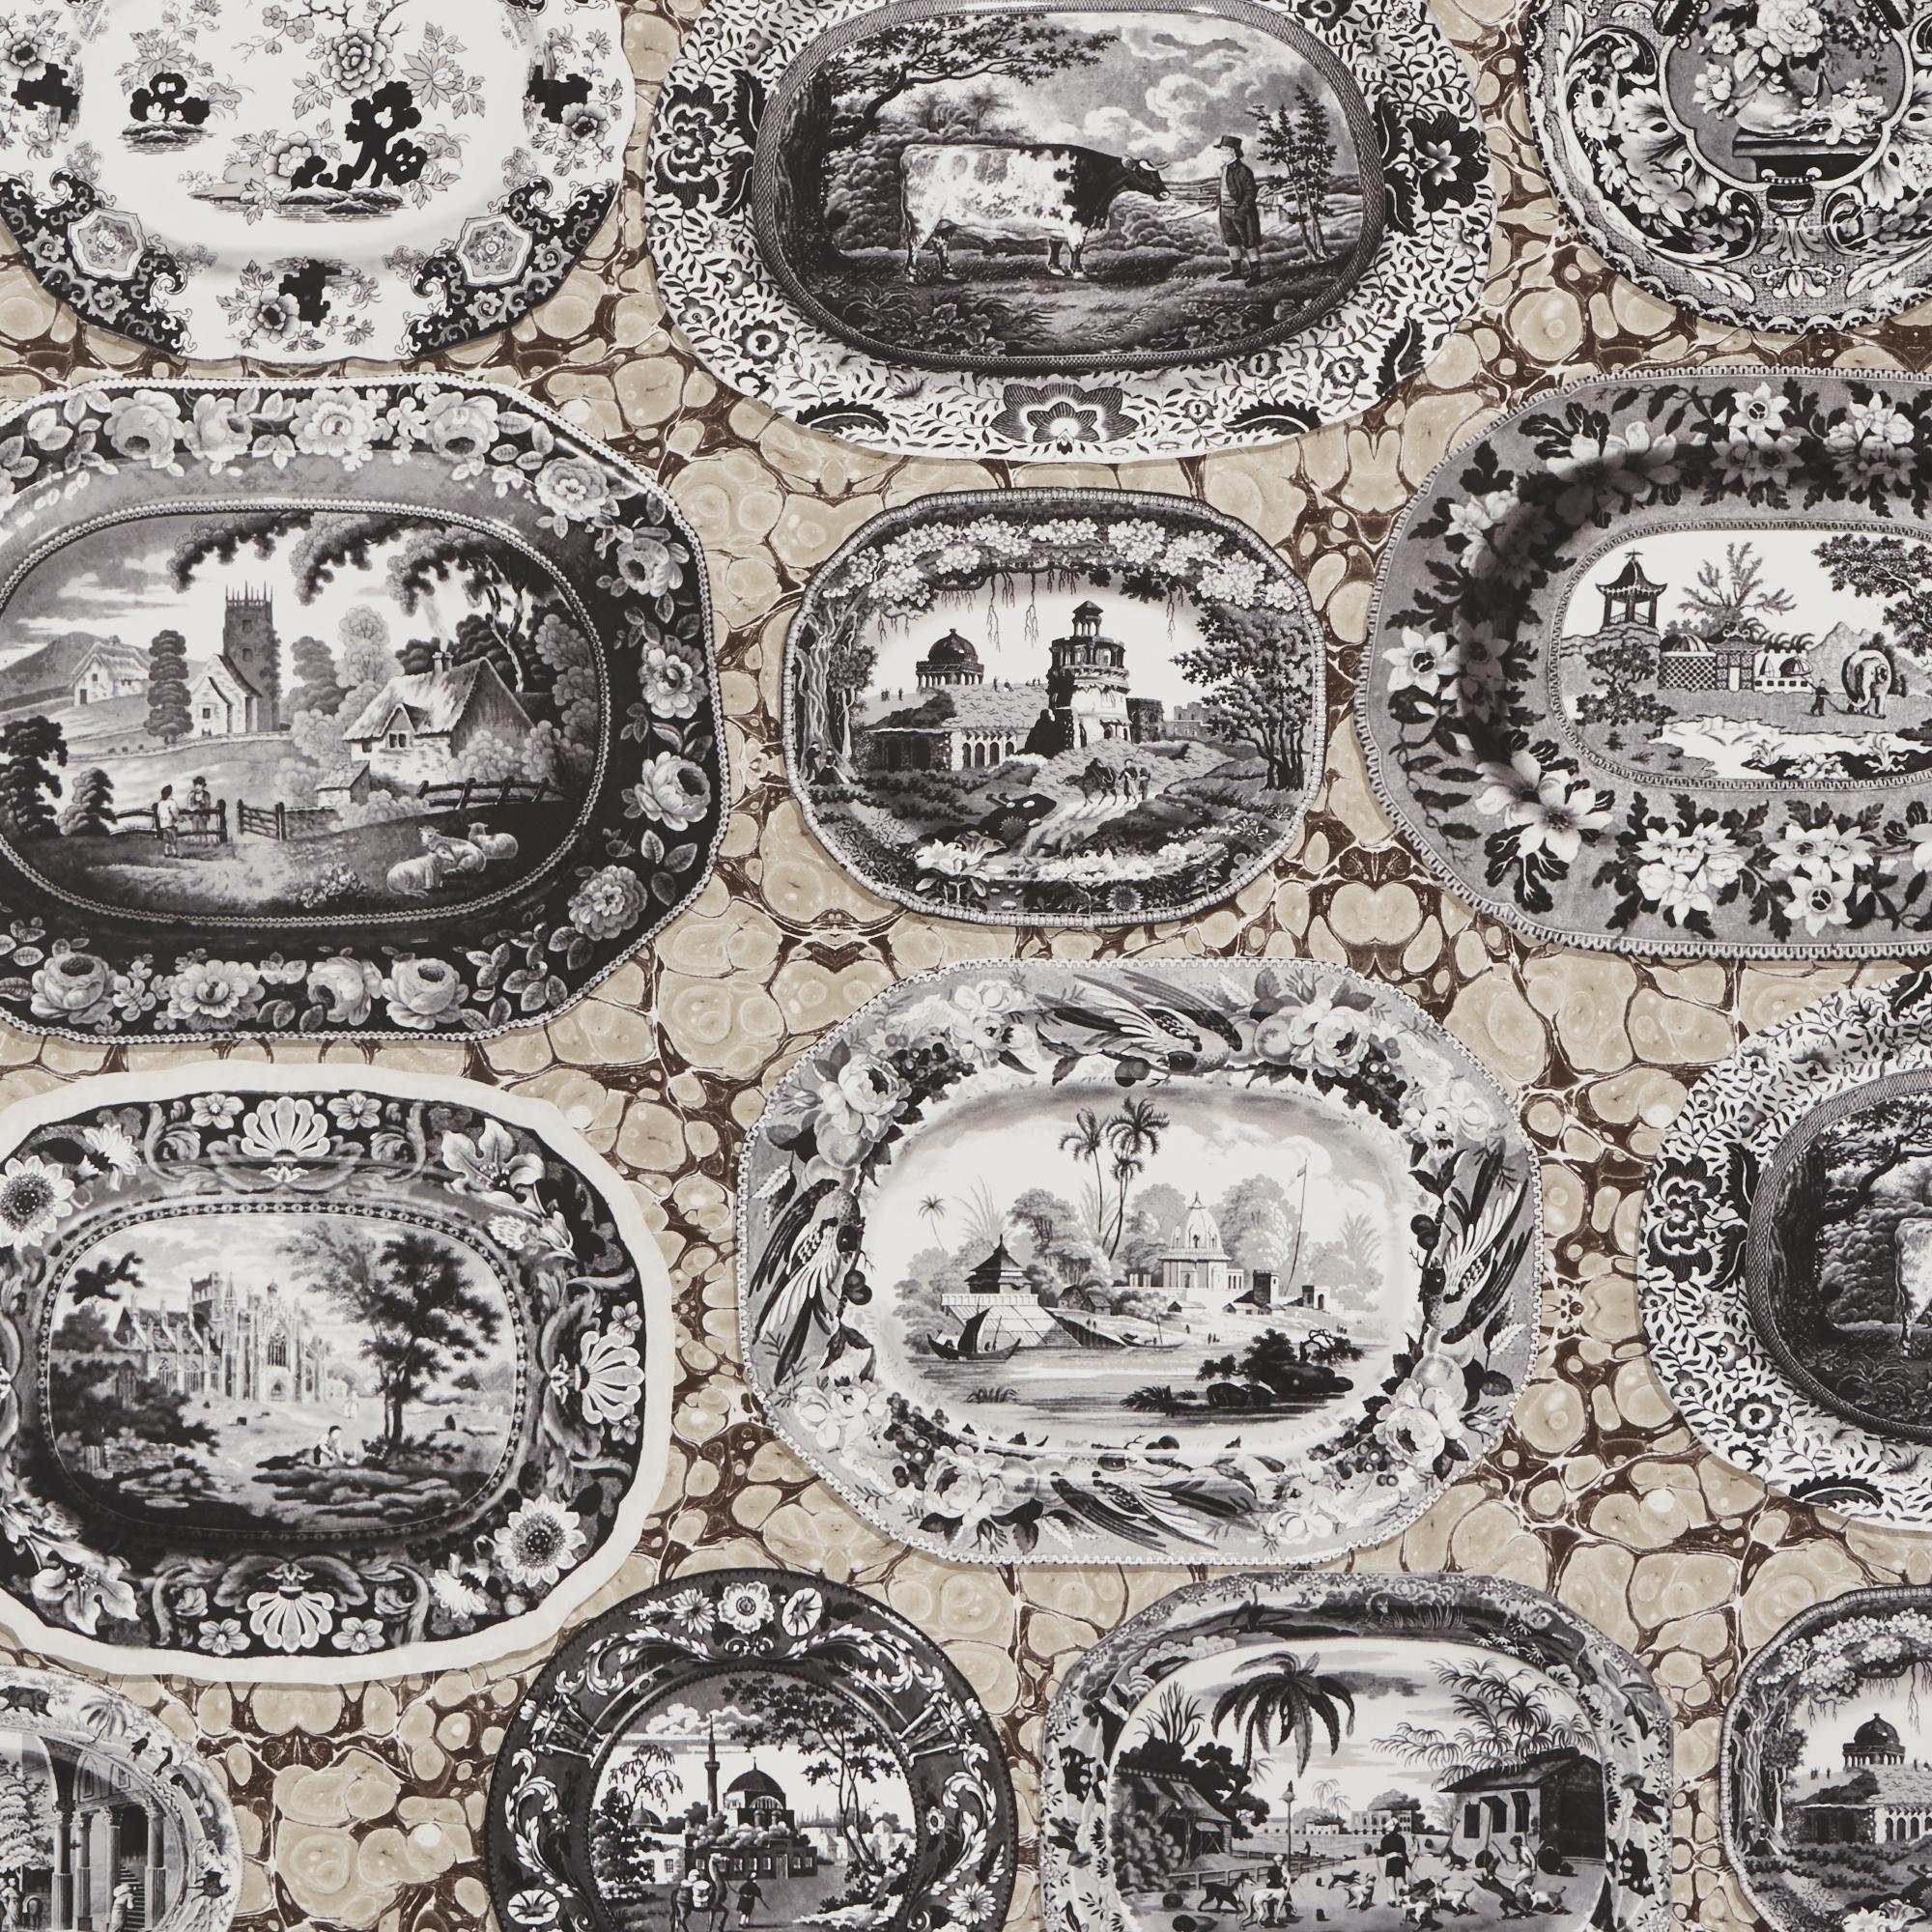 A trompe l’oeil pattern of transferware serving dishes mounted on a marbleized backdrop creates the ultimate layered illusion and instant drama, no hammers or nails required.

Since Schumacher was founded in 1889, our family-owned company has been